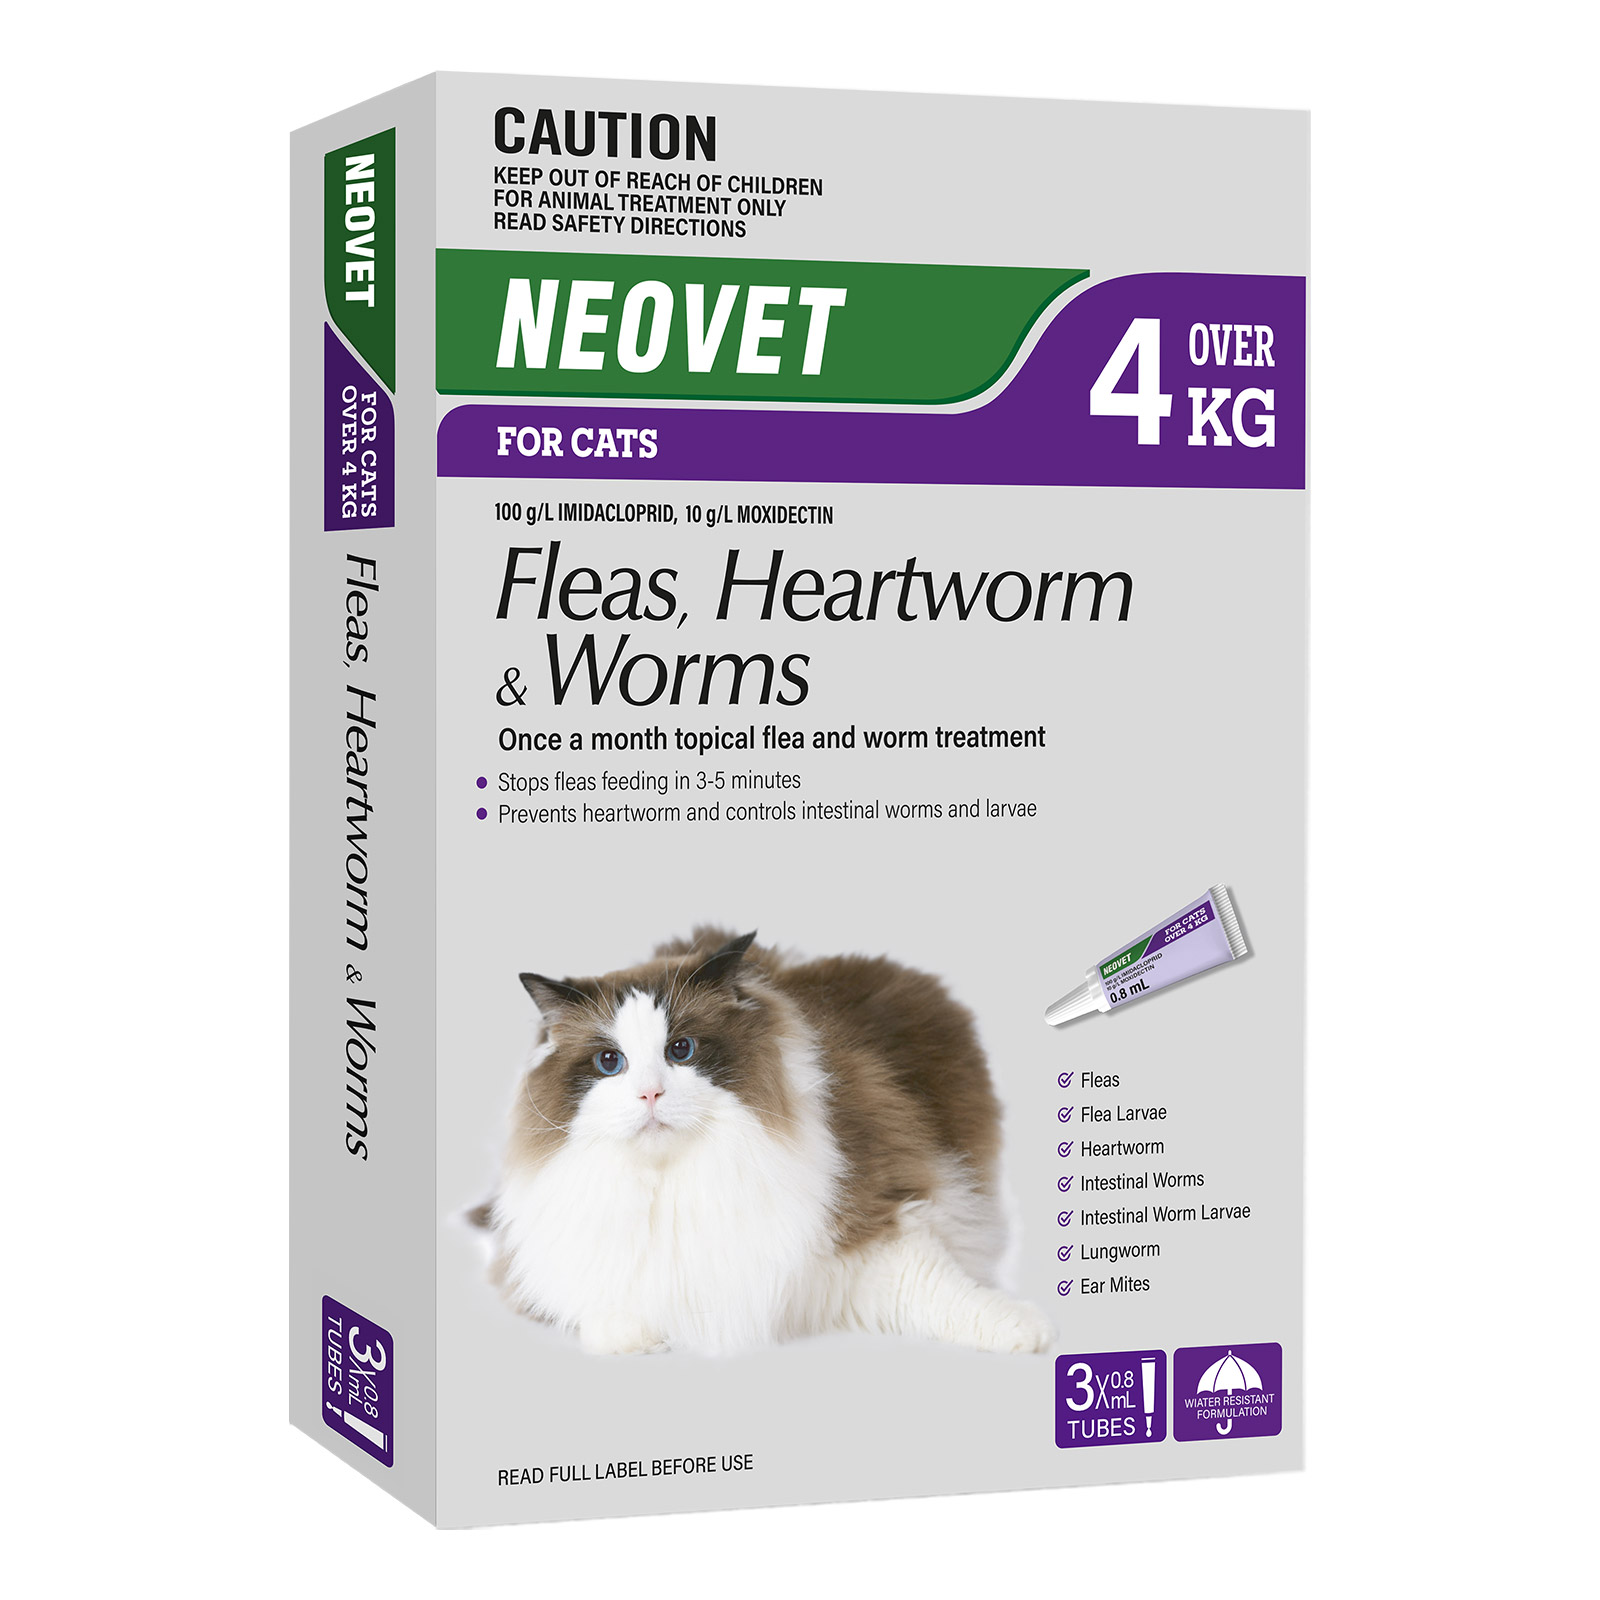 Neovet Spot-On For Large Cats Over 8.8lbs (Purple) 3 Pipettes
